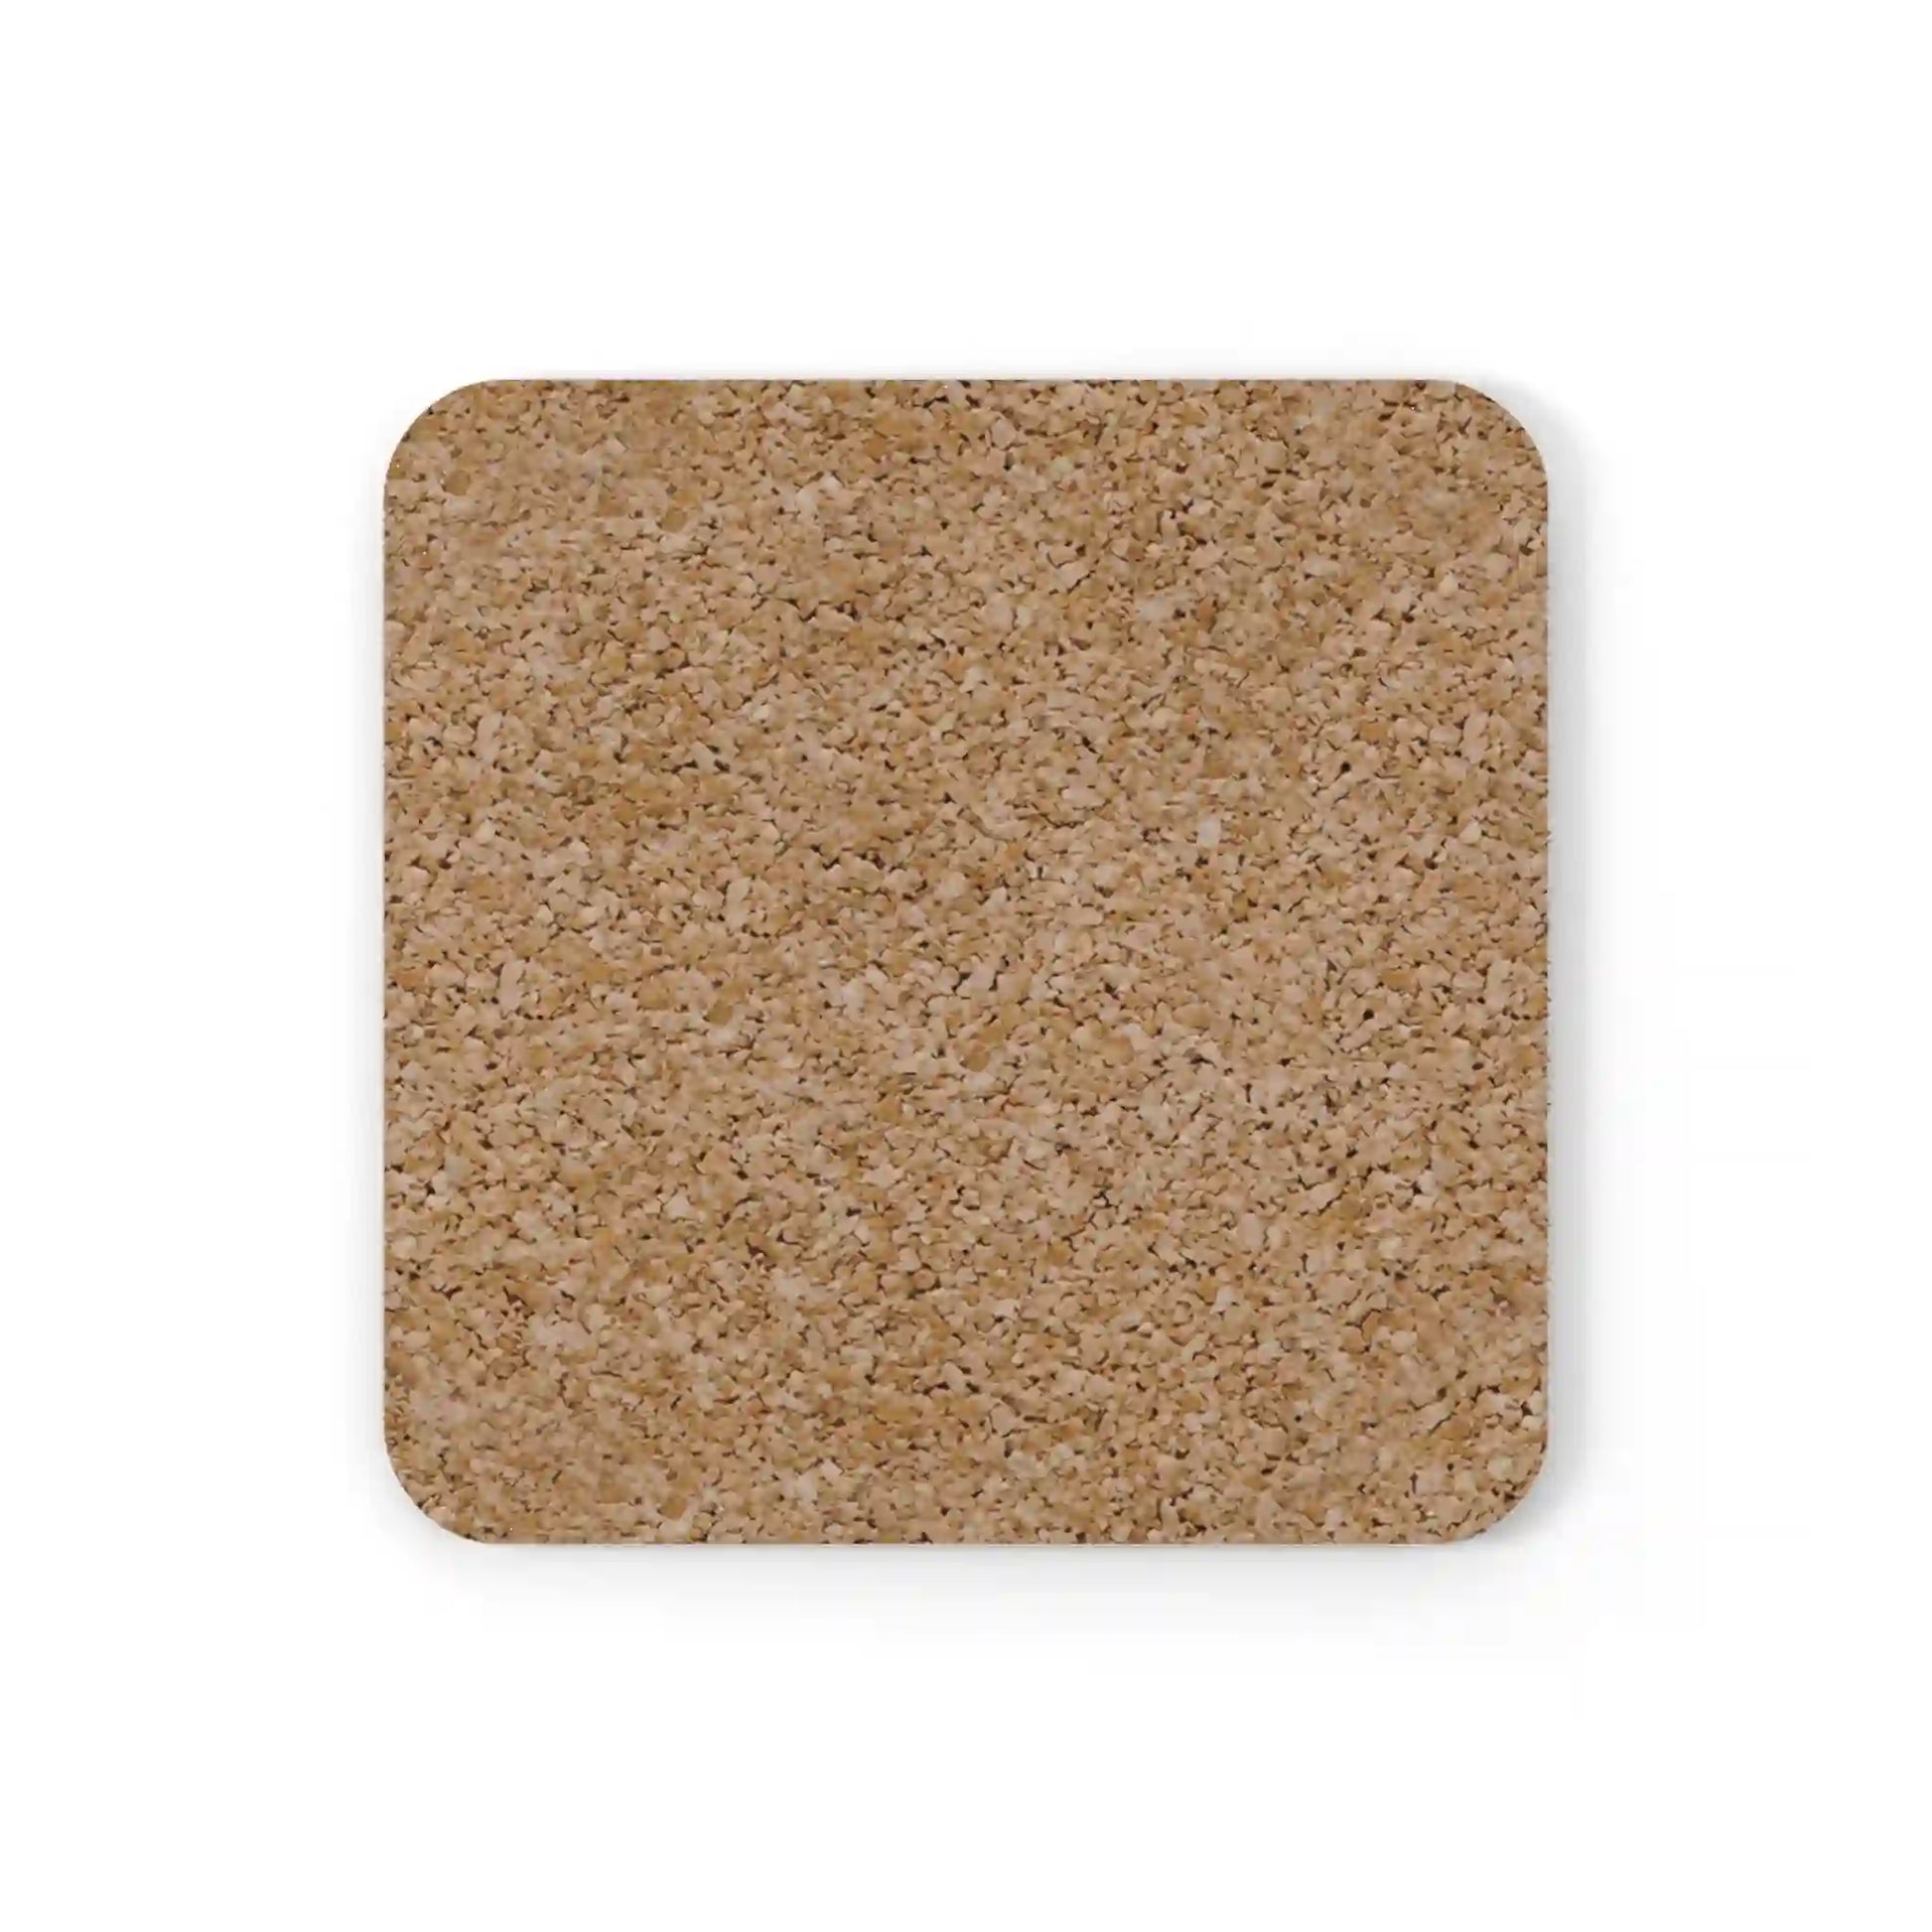 Non-slip premium cork coaster, furniture protection, mama gift, Mother's Day, gifts for mom, mom mode